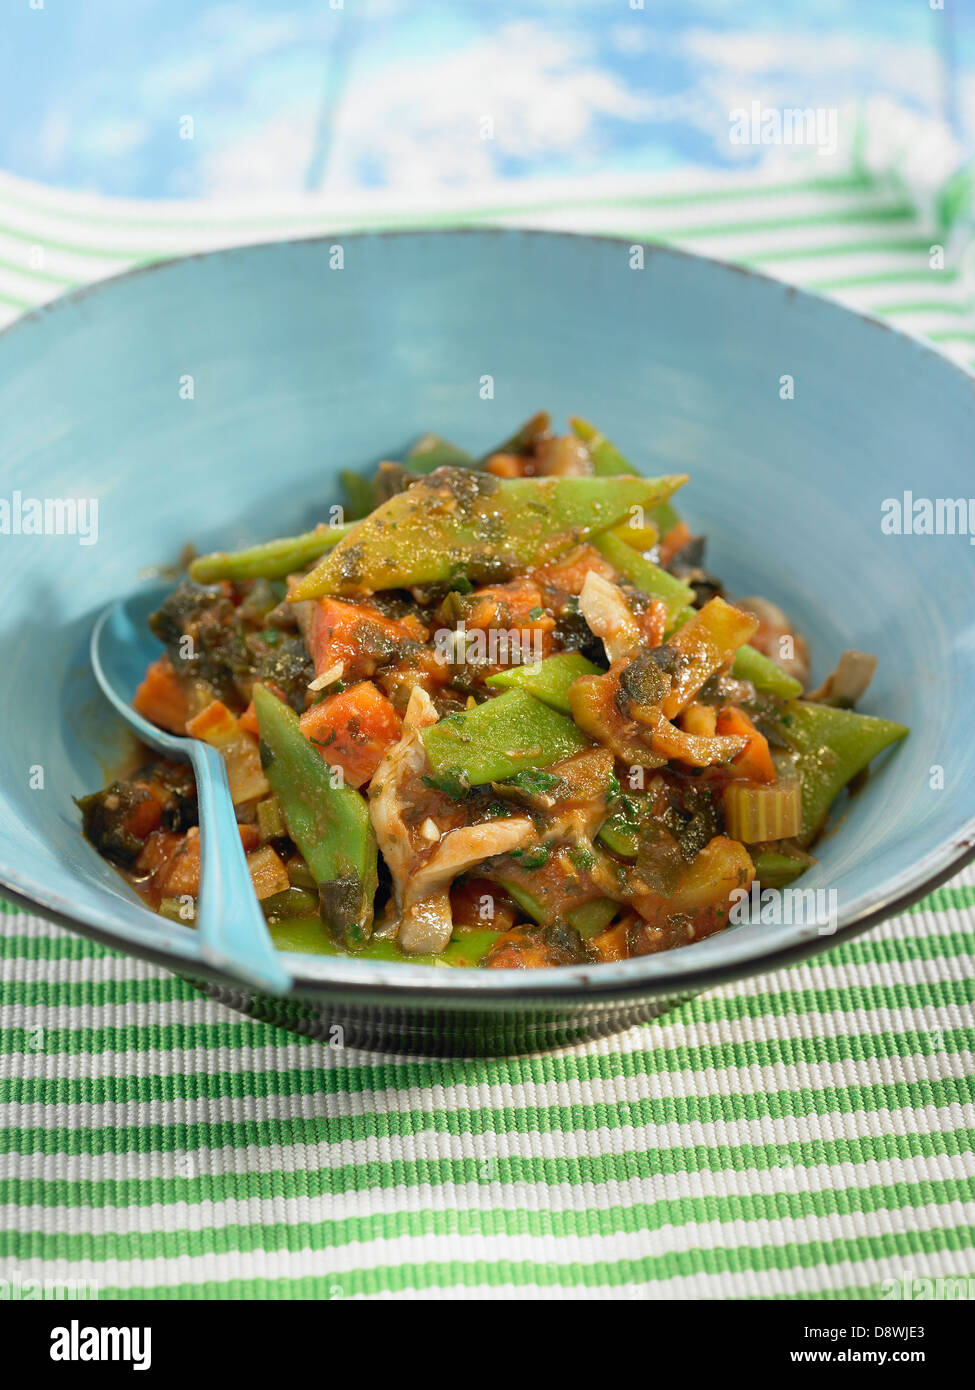 Runner beans with chopped celery,sweet potato and wakame seaweed sauce Stock Photo